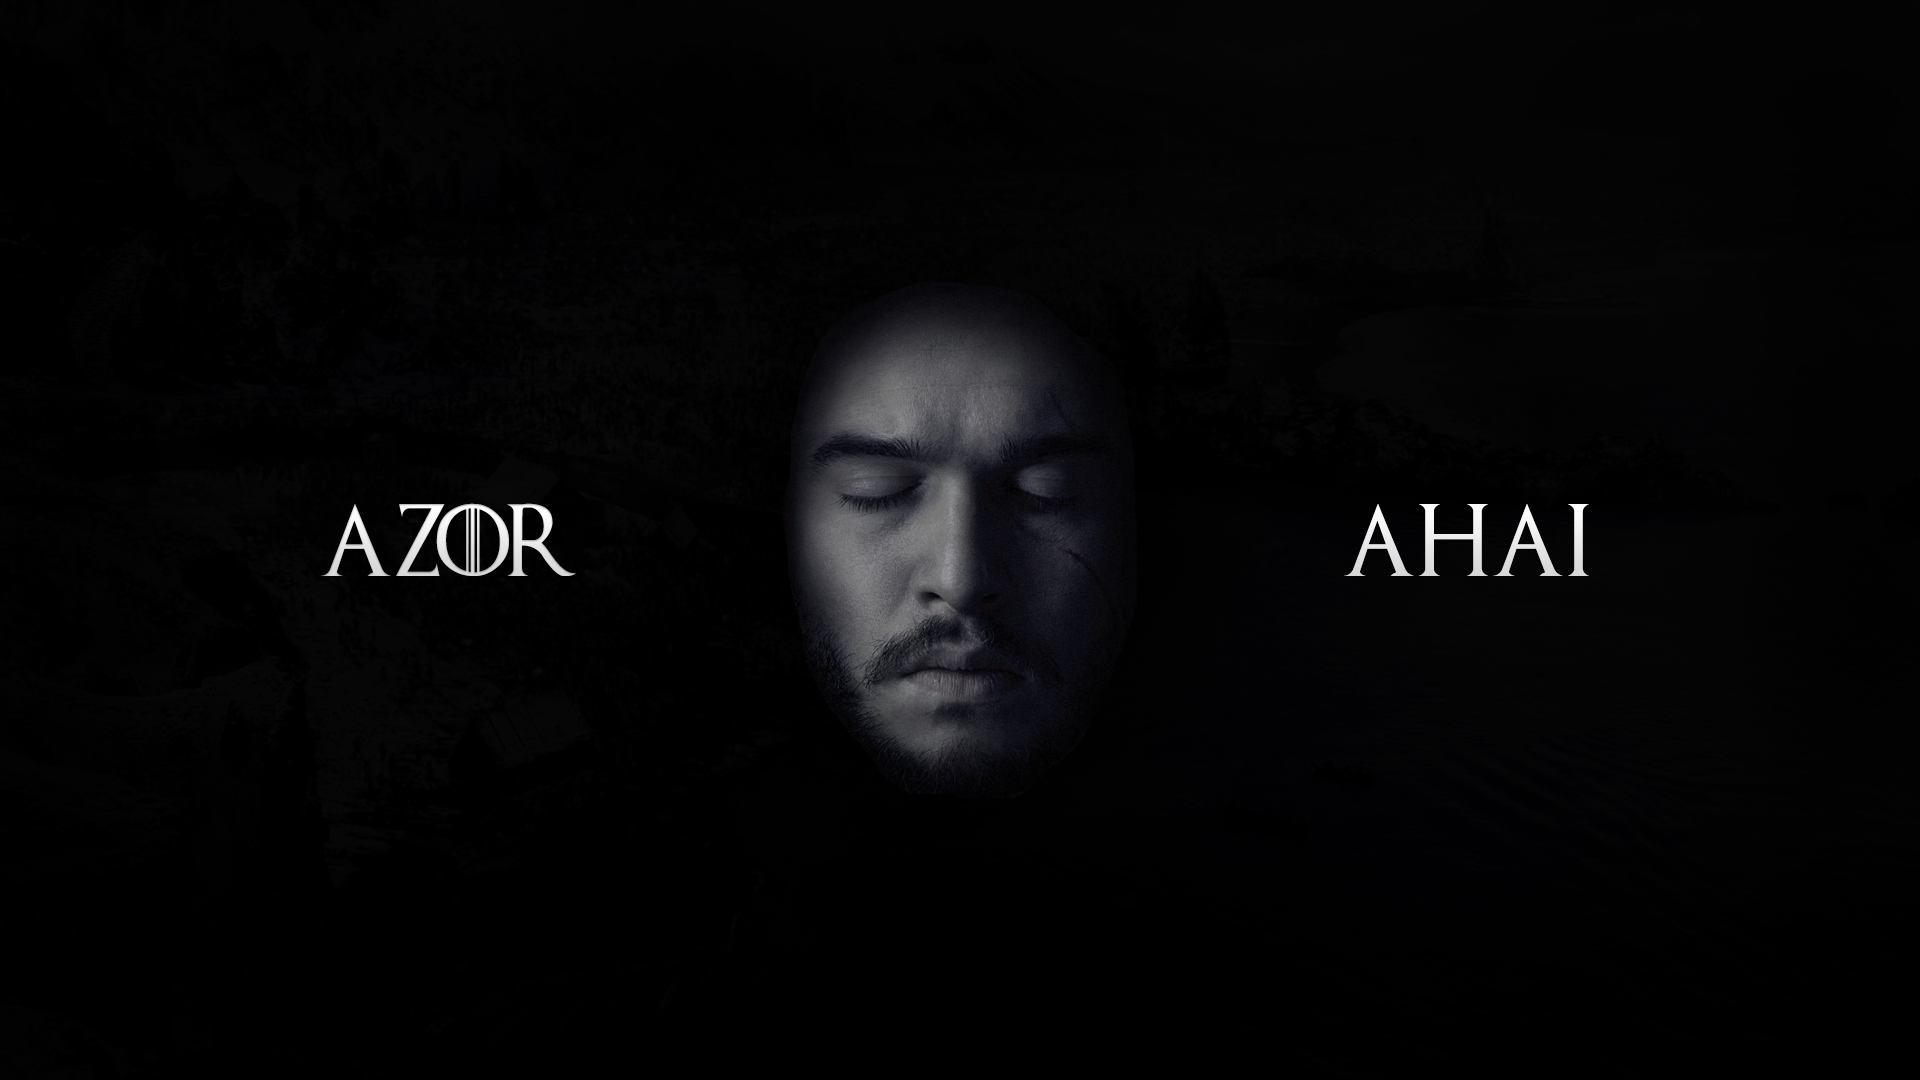 General 1920x1080 Game of Thrones A Song of Ice and Fire Azor Ahai Jon Snow TV series actor face men black background simple background